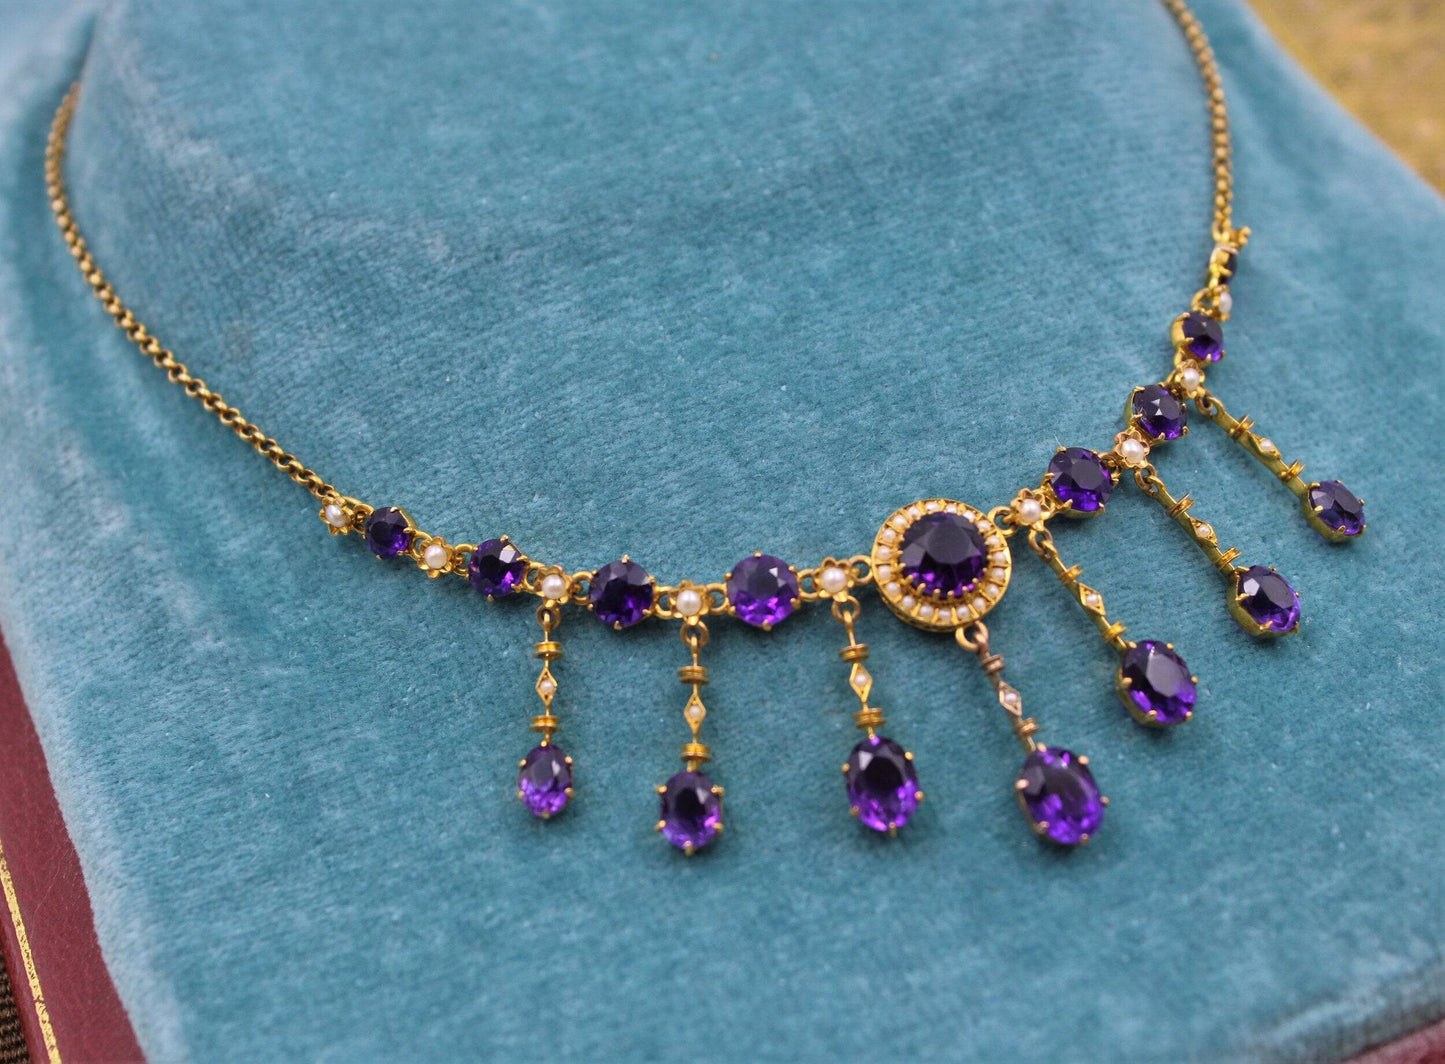 A very fine Edwardian Amethyst & Seed Pearl Necklace in High Carat Yellow Gold, English, Circa 1905 - Robin Haydock Antiques